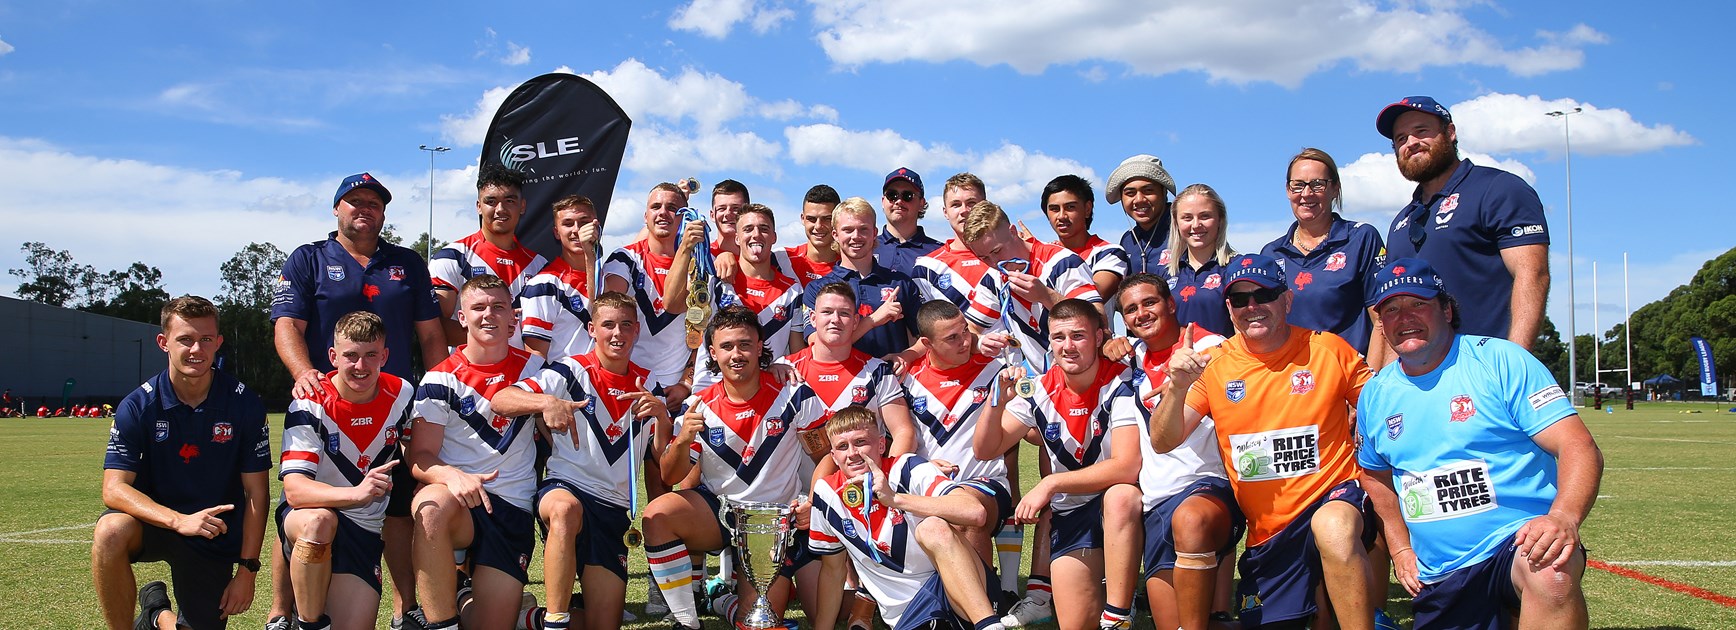 Roosters roll Tigers in Grand Final to complete undefeated season